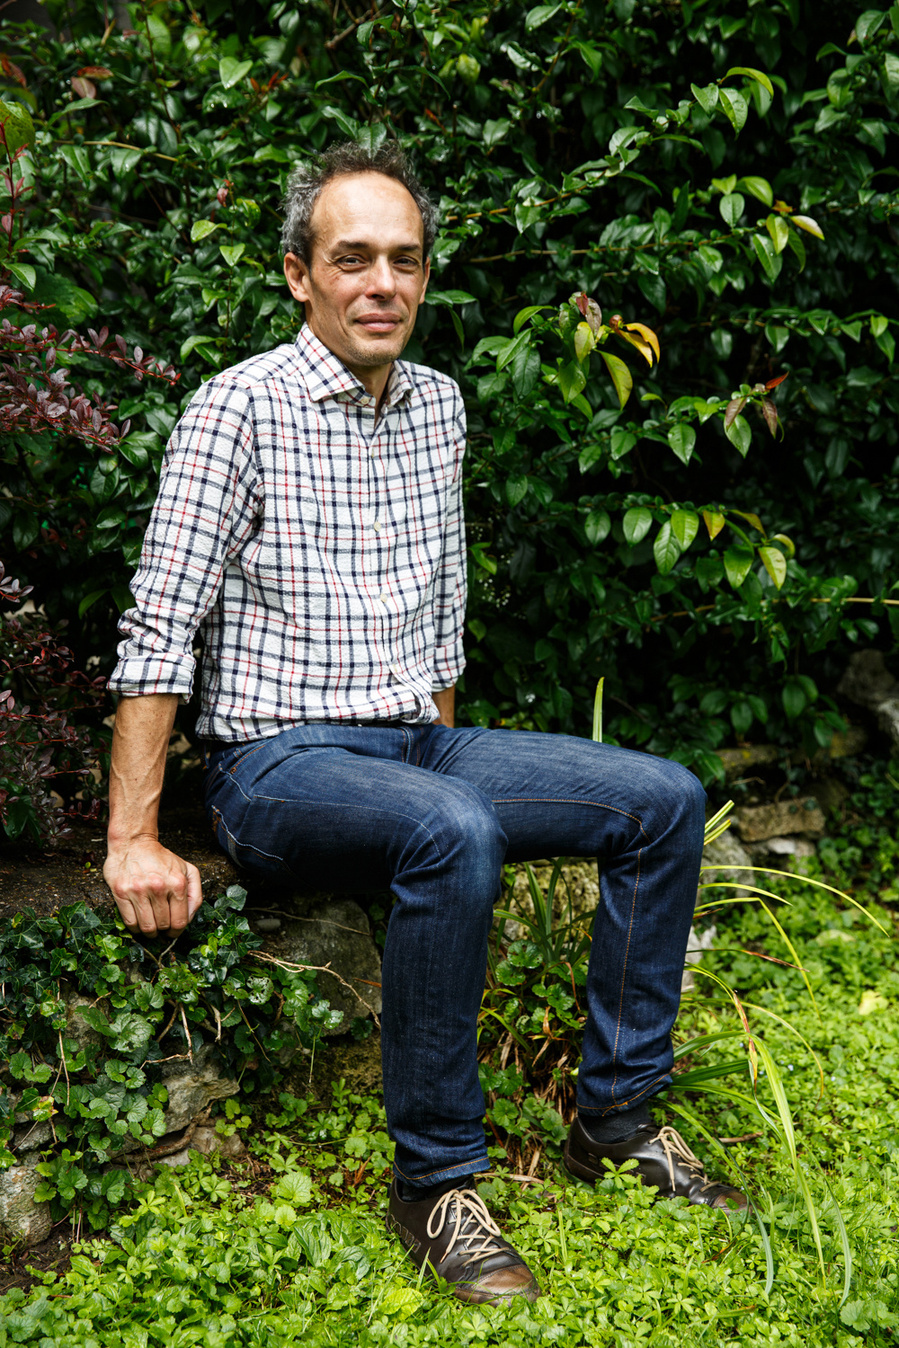 Davide Uglietti a physicist living in Switzerland sits in the lush green garden of his house. Portrait for the Financial Times.